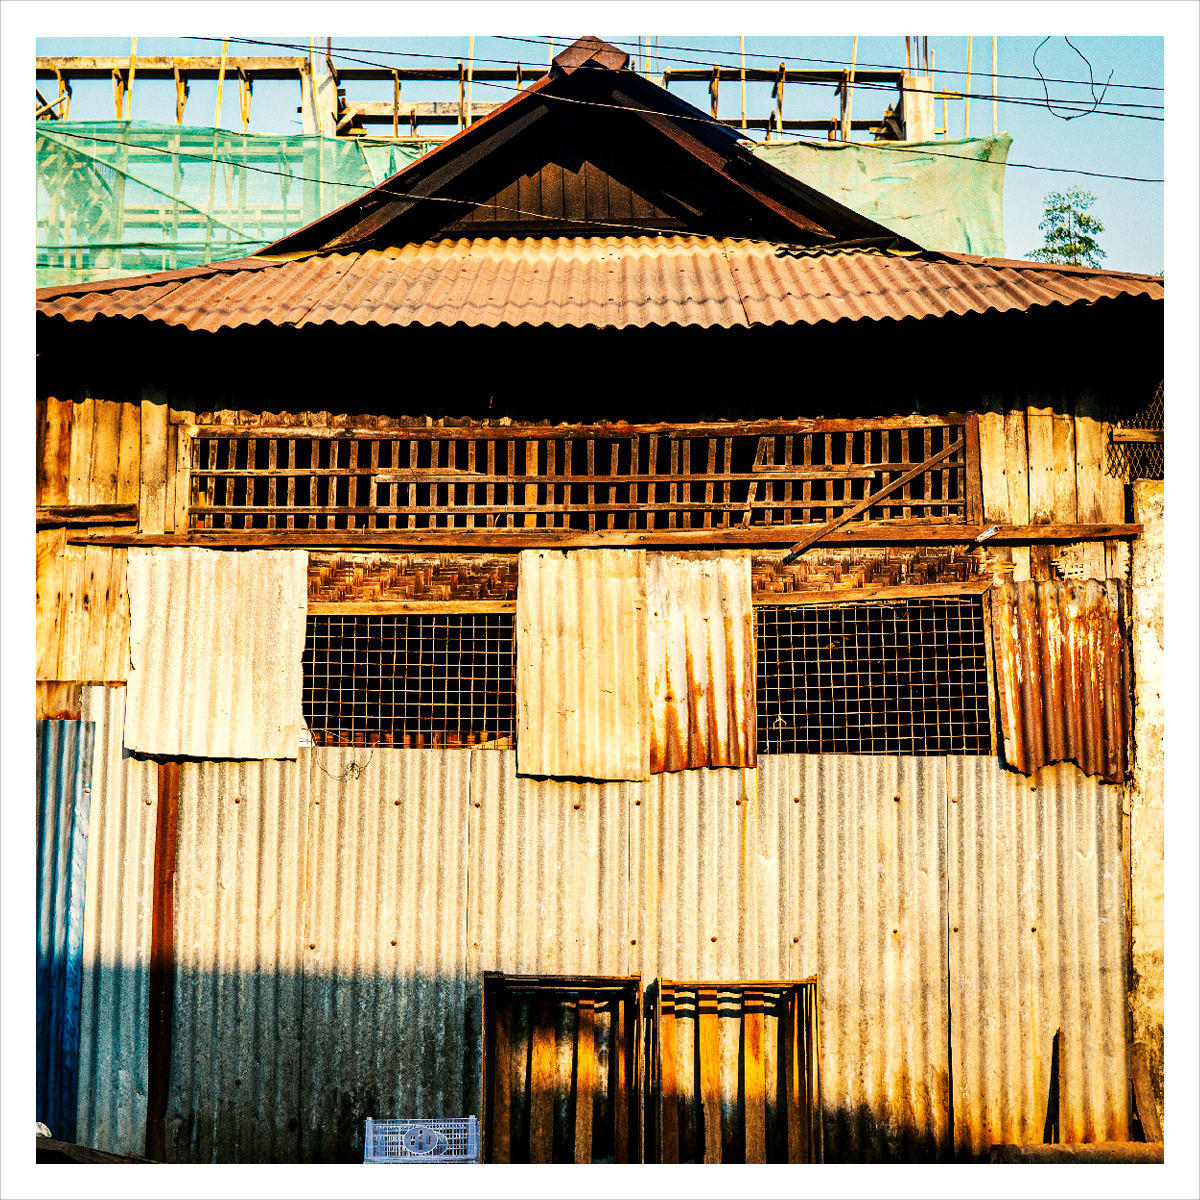 photography of streetlife, daily happenings and architecture in thailand and burma